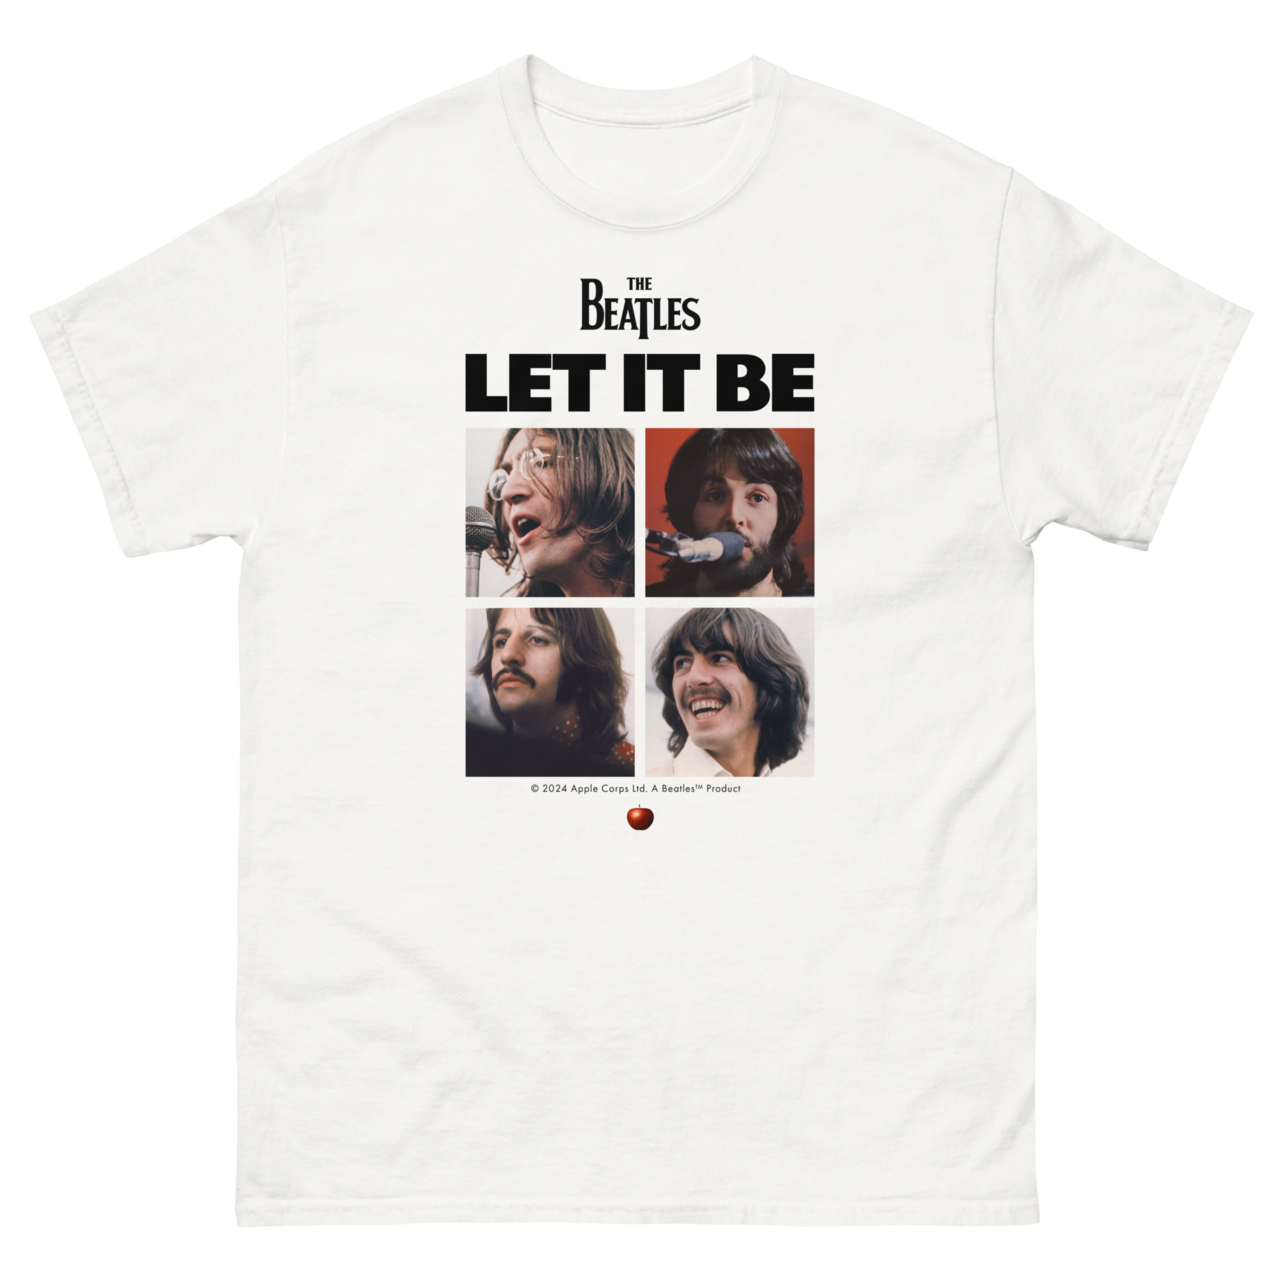 The Beatles - Let it be White T-Shirt